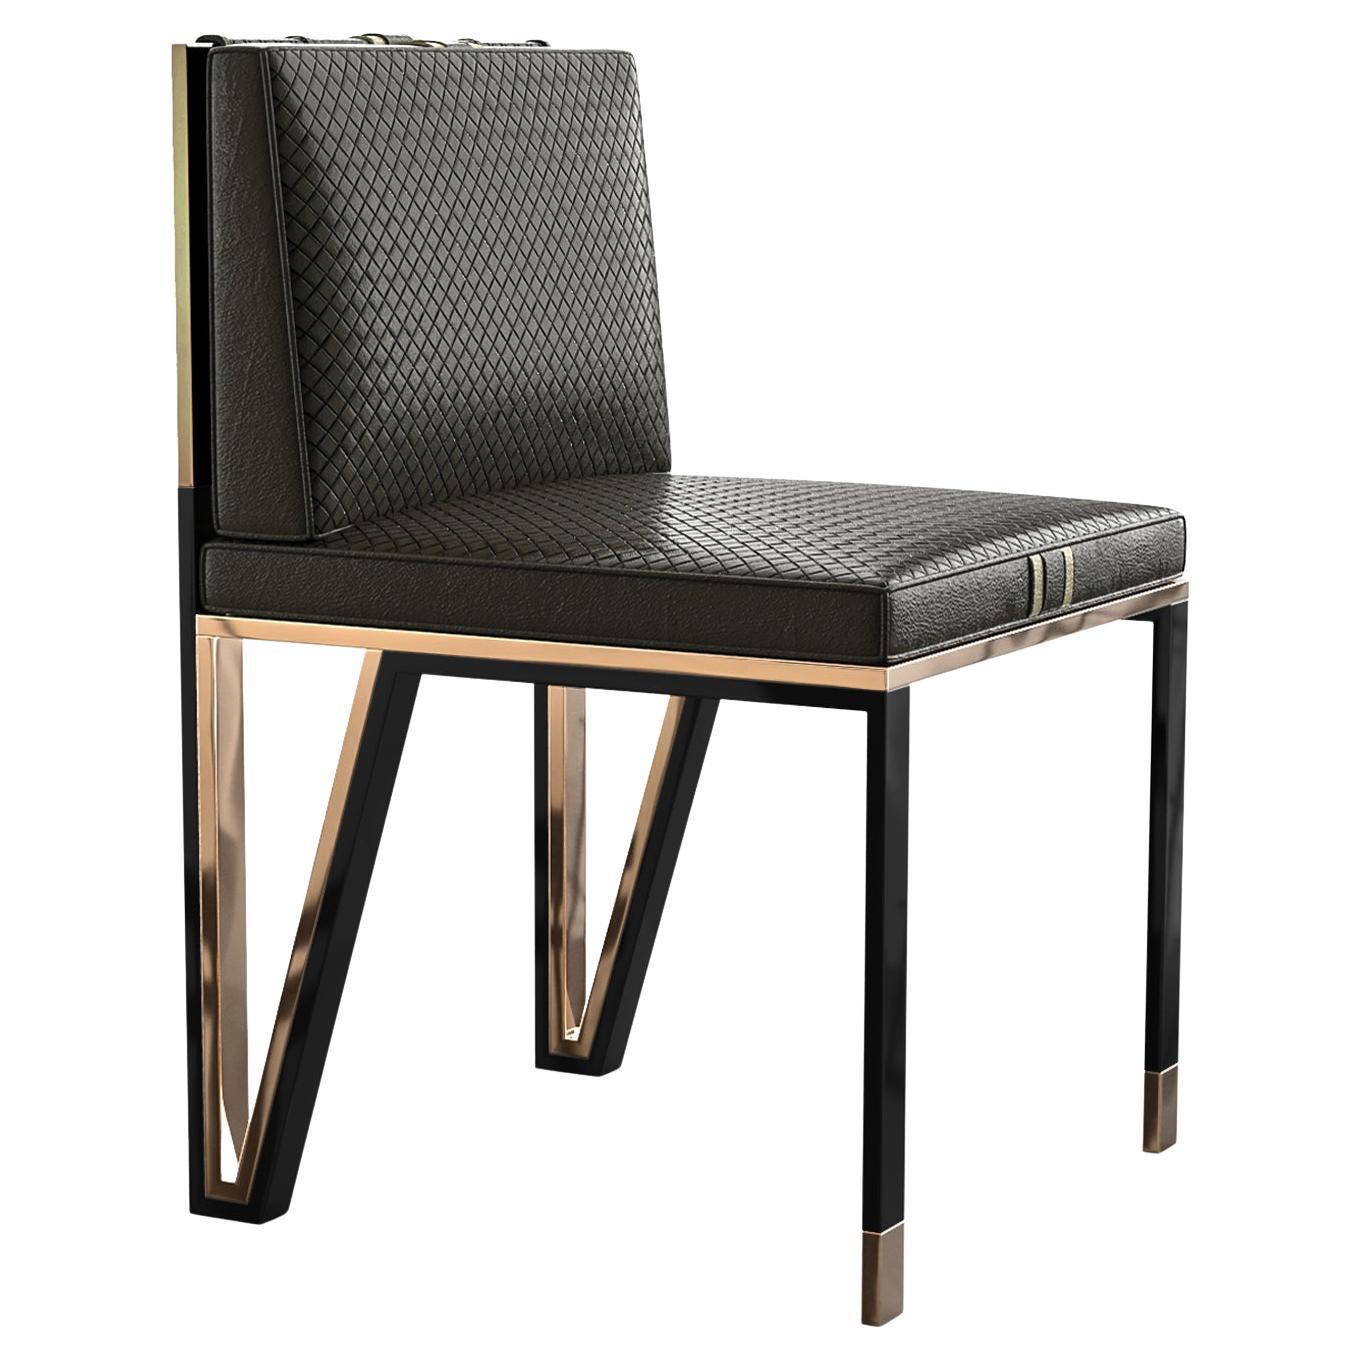 "Stella" Chair with Bronze and Exclusive Woven Leather, Hand Crafted, Istanbul